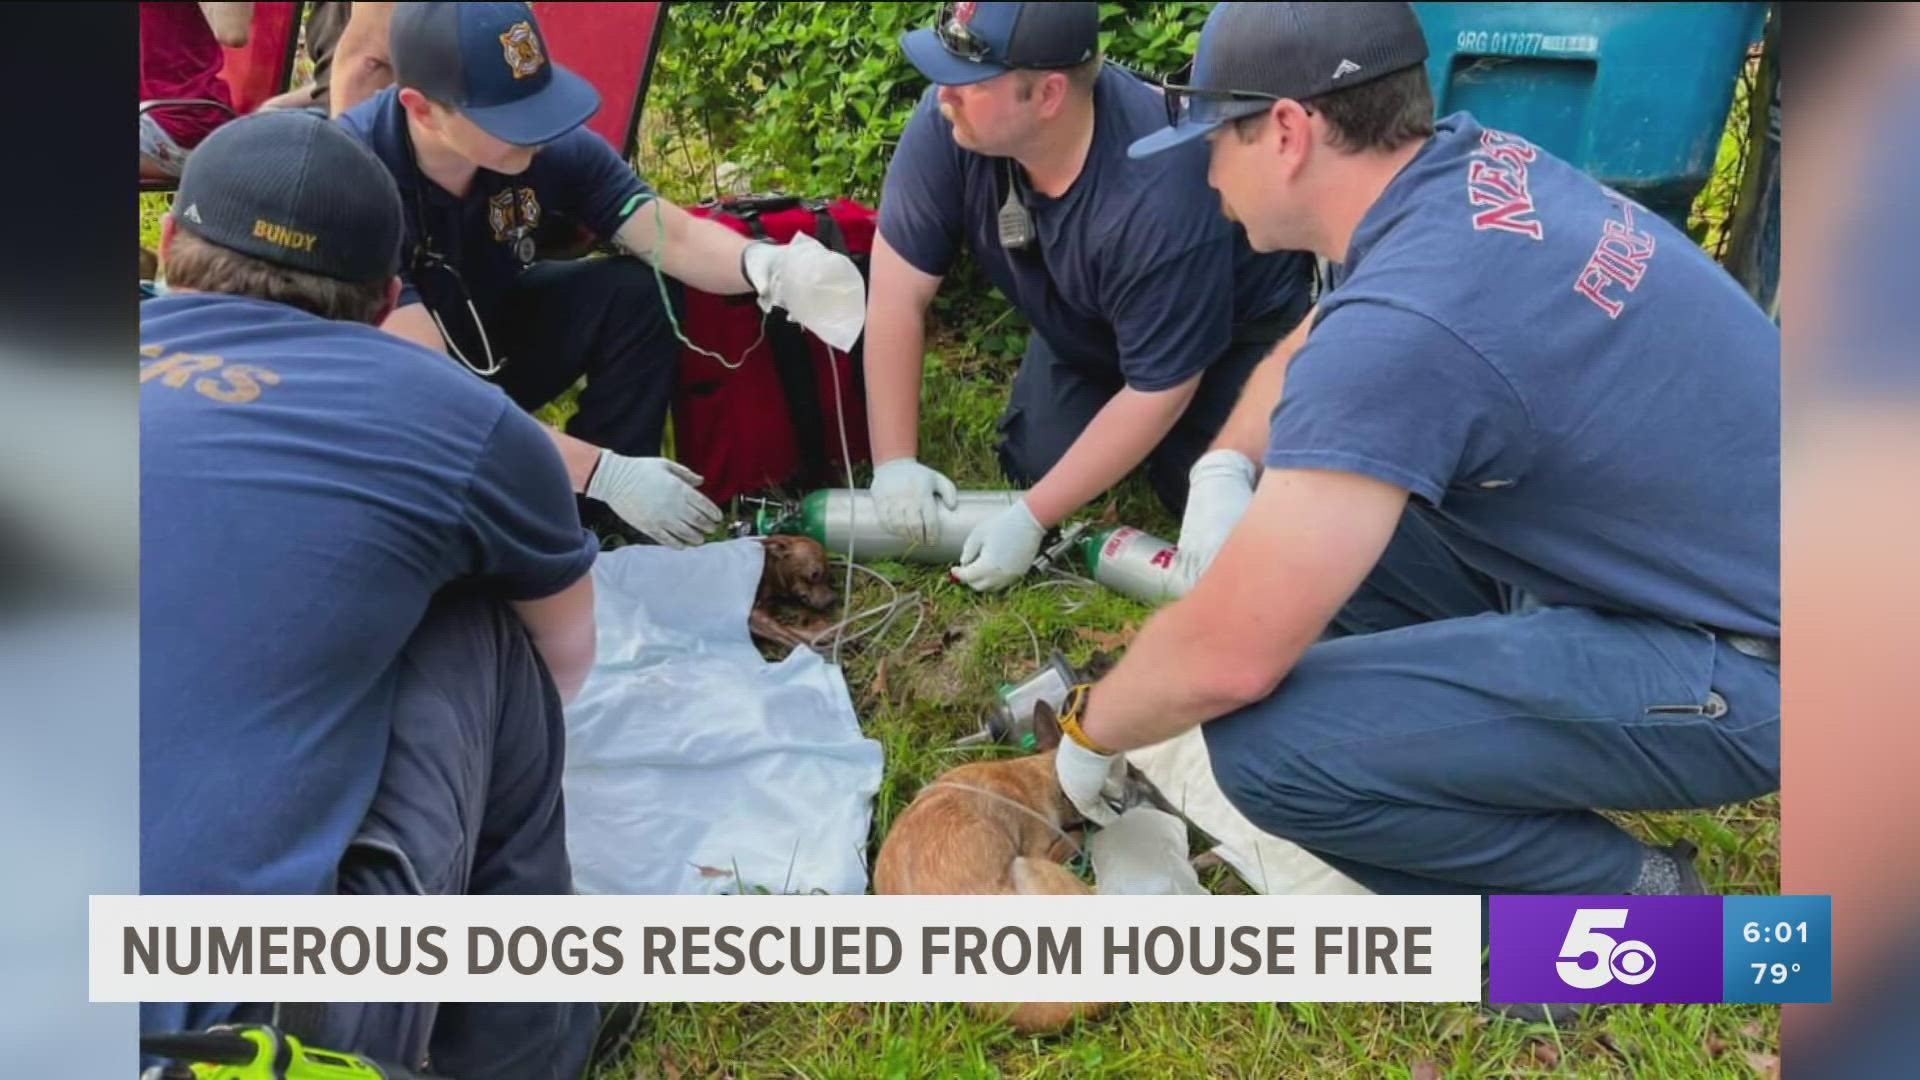 Benton County Sheriff's Office is investigating a house fire after local fire departments helped remove 149 dogs from the fire with only 73 surviving.